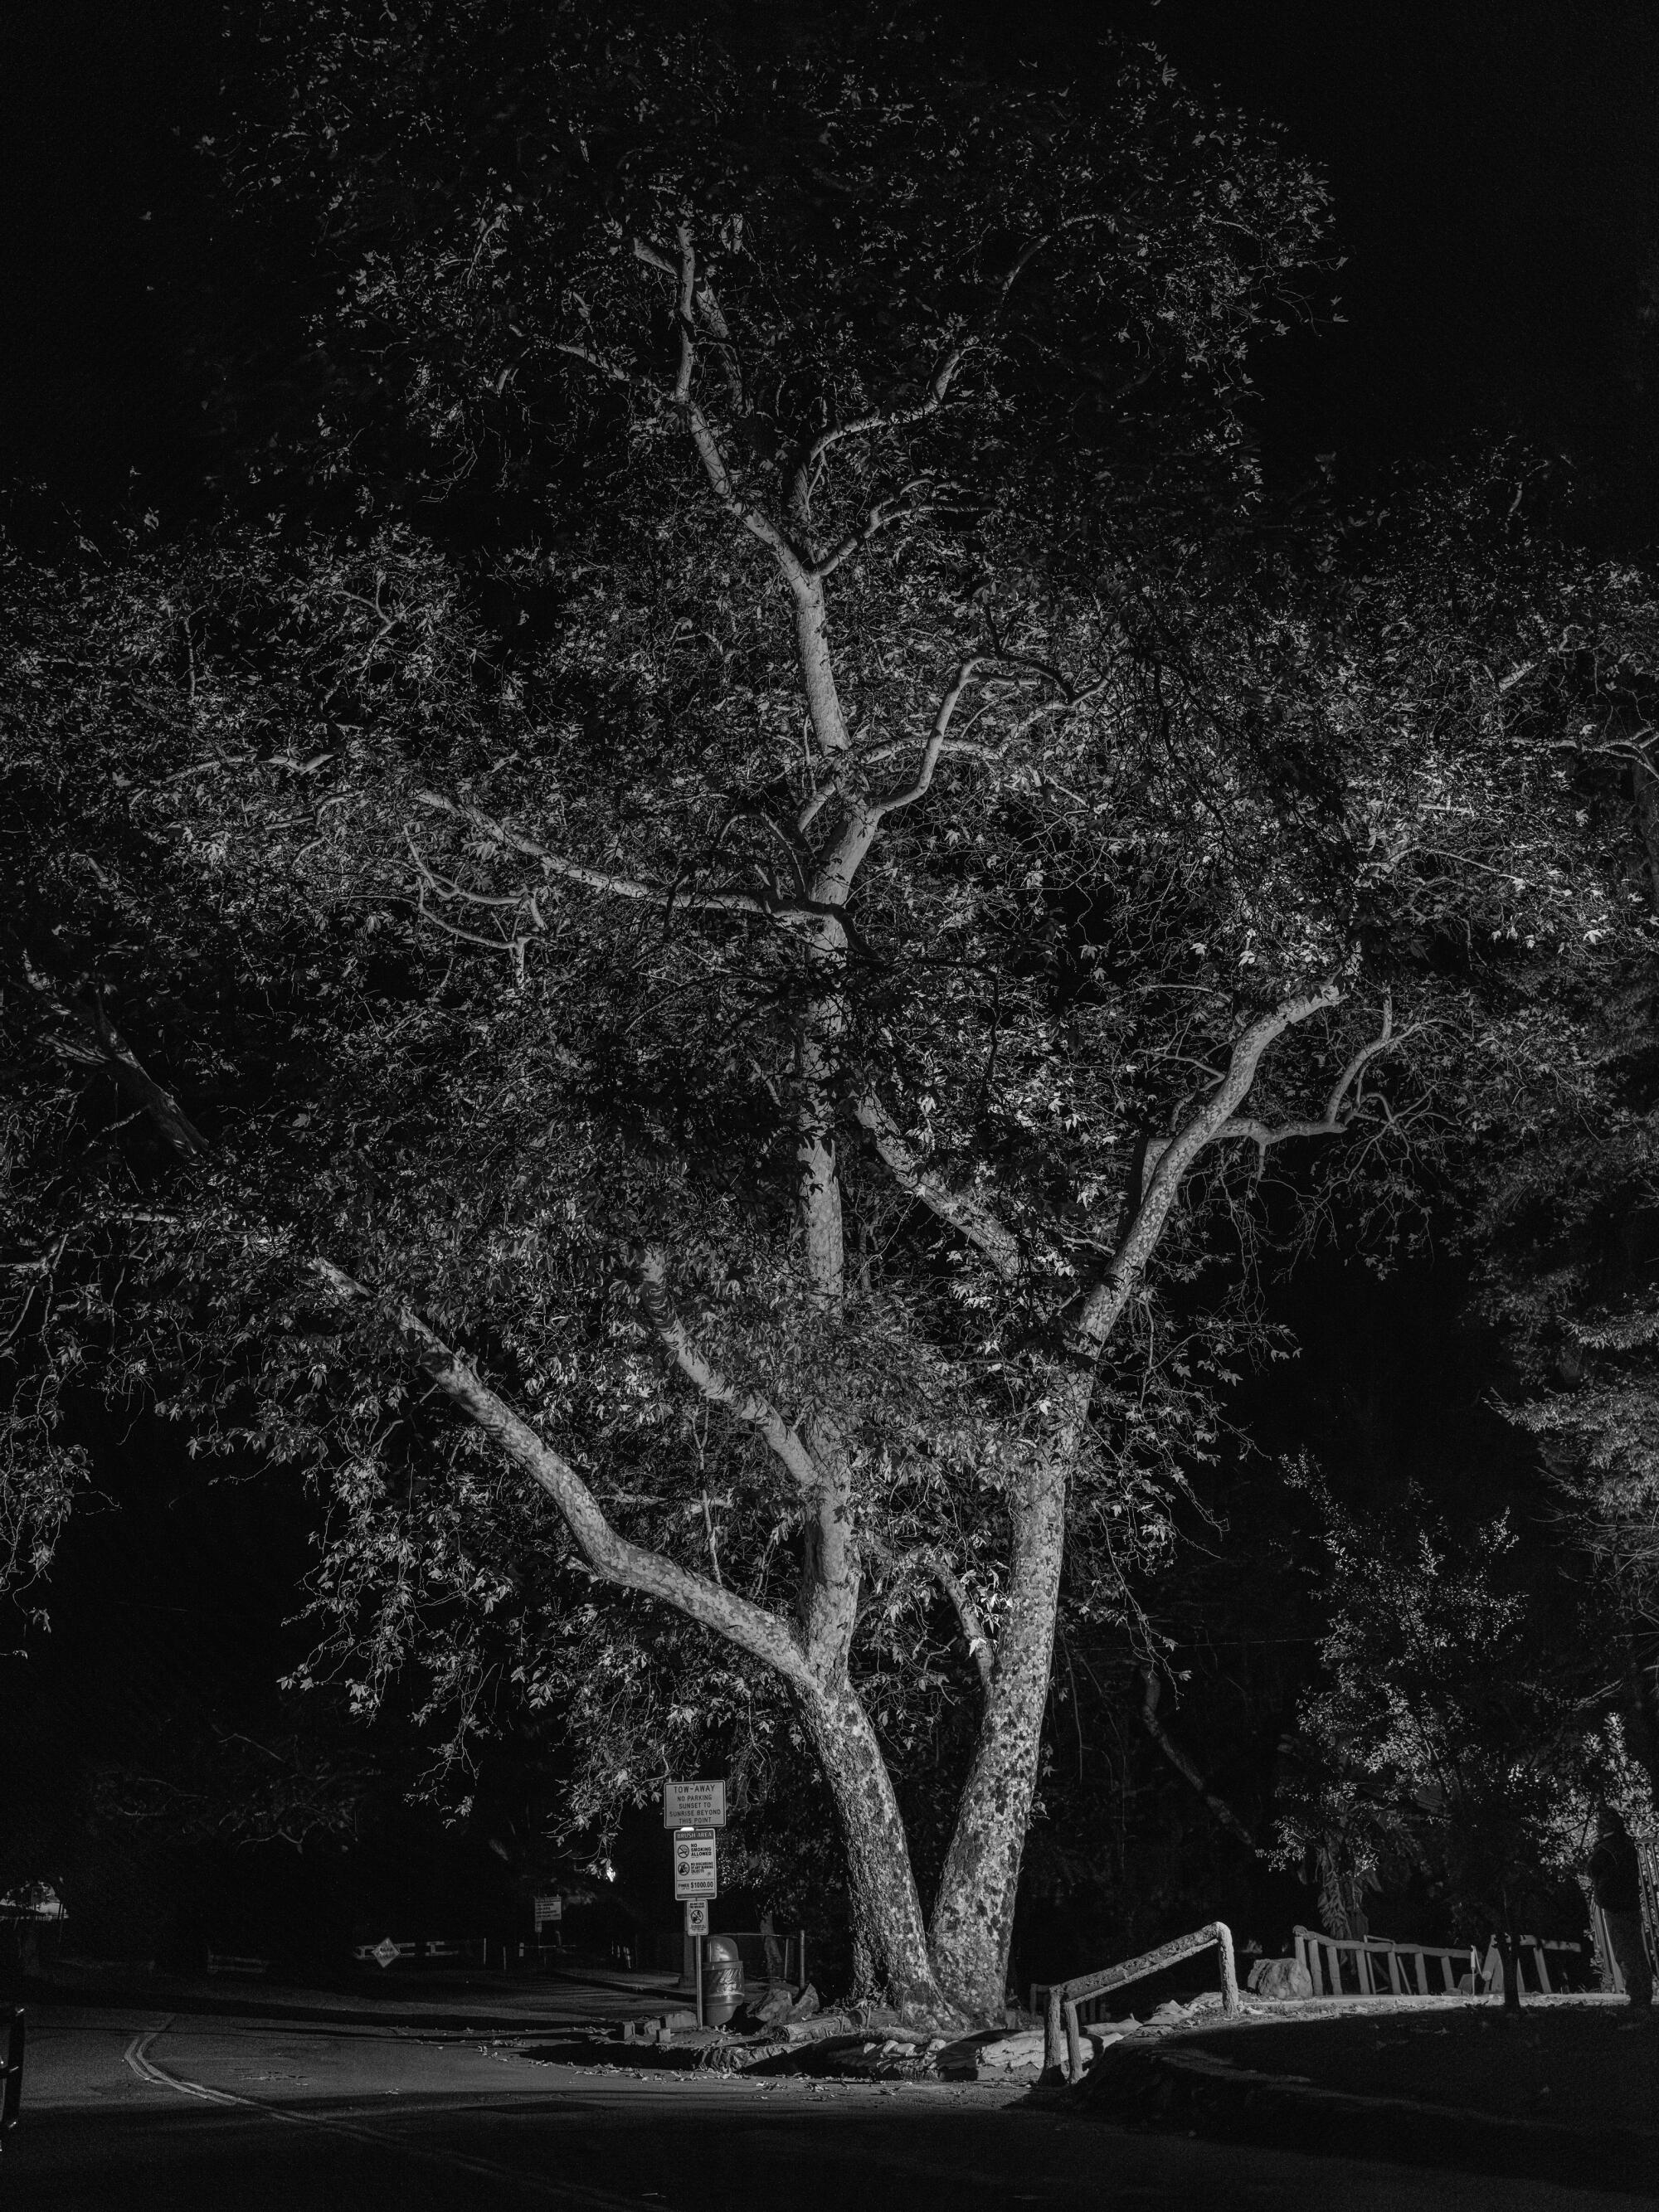 The sycamore tree at night.